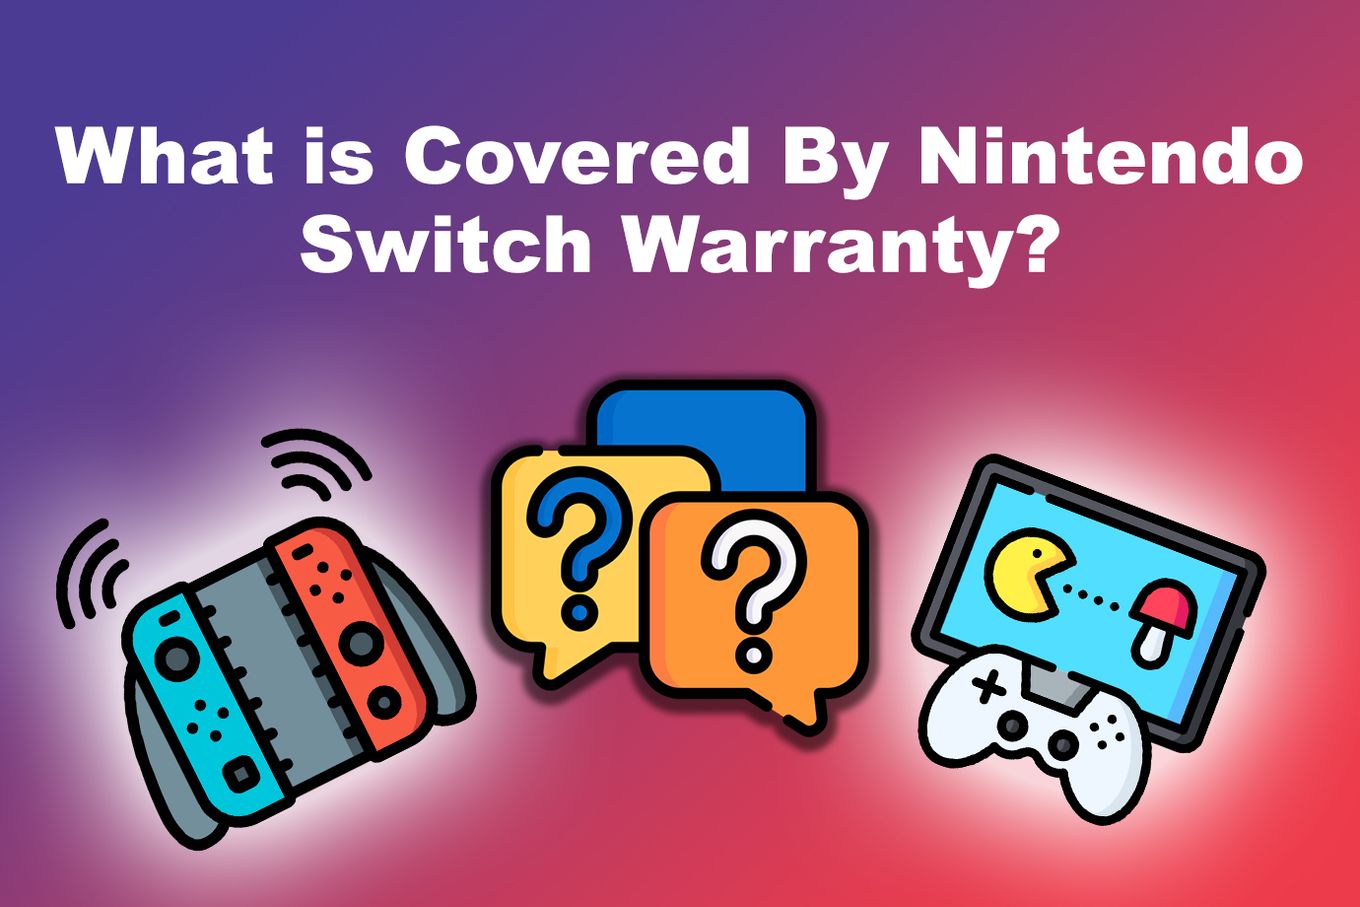 Nintendo Switch Warranty [Duration, Coverage, to